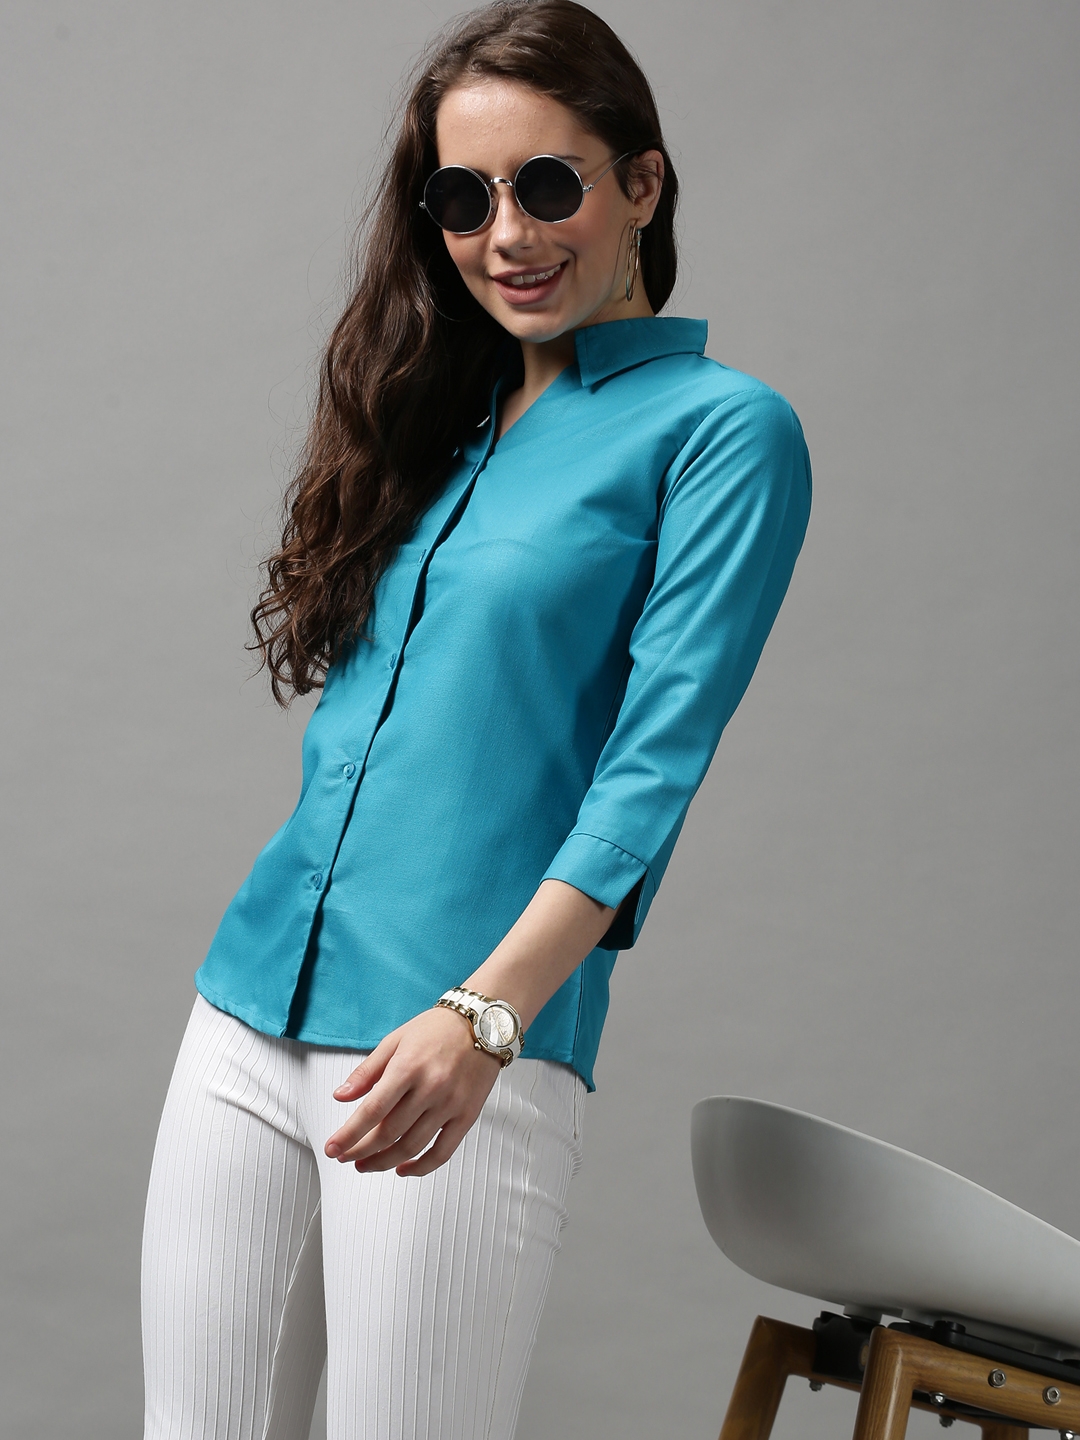 SHOWOFF Women's Spread Collar Solid Turquoise Blue Polyester Shirt